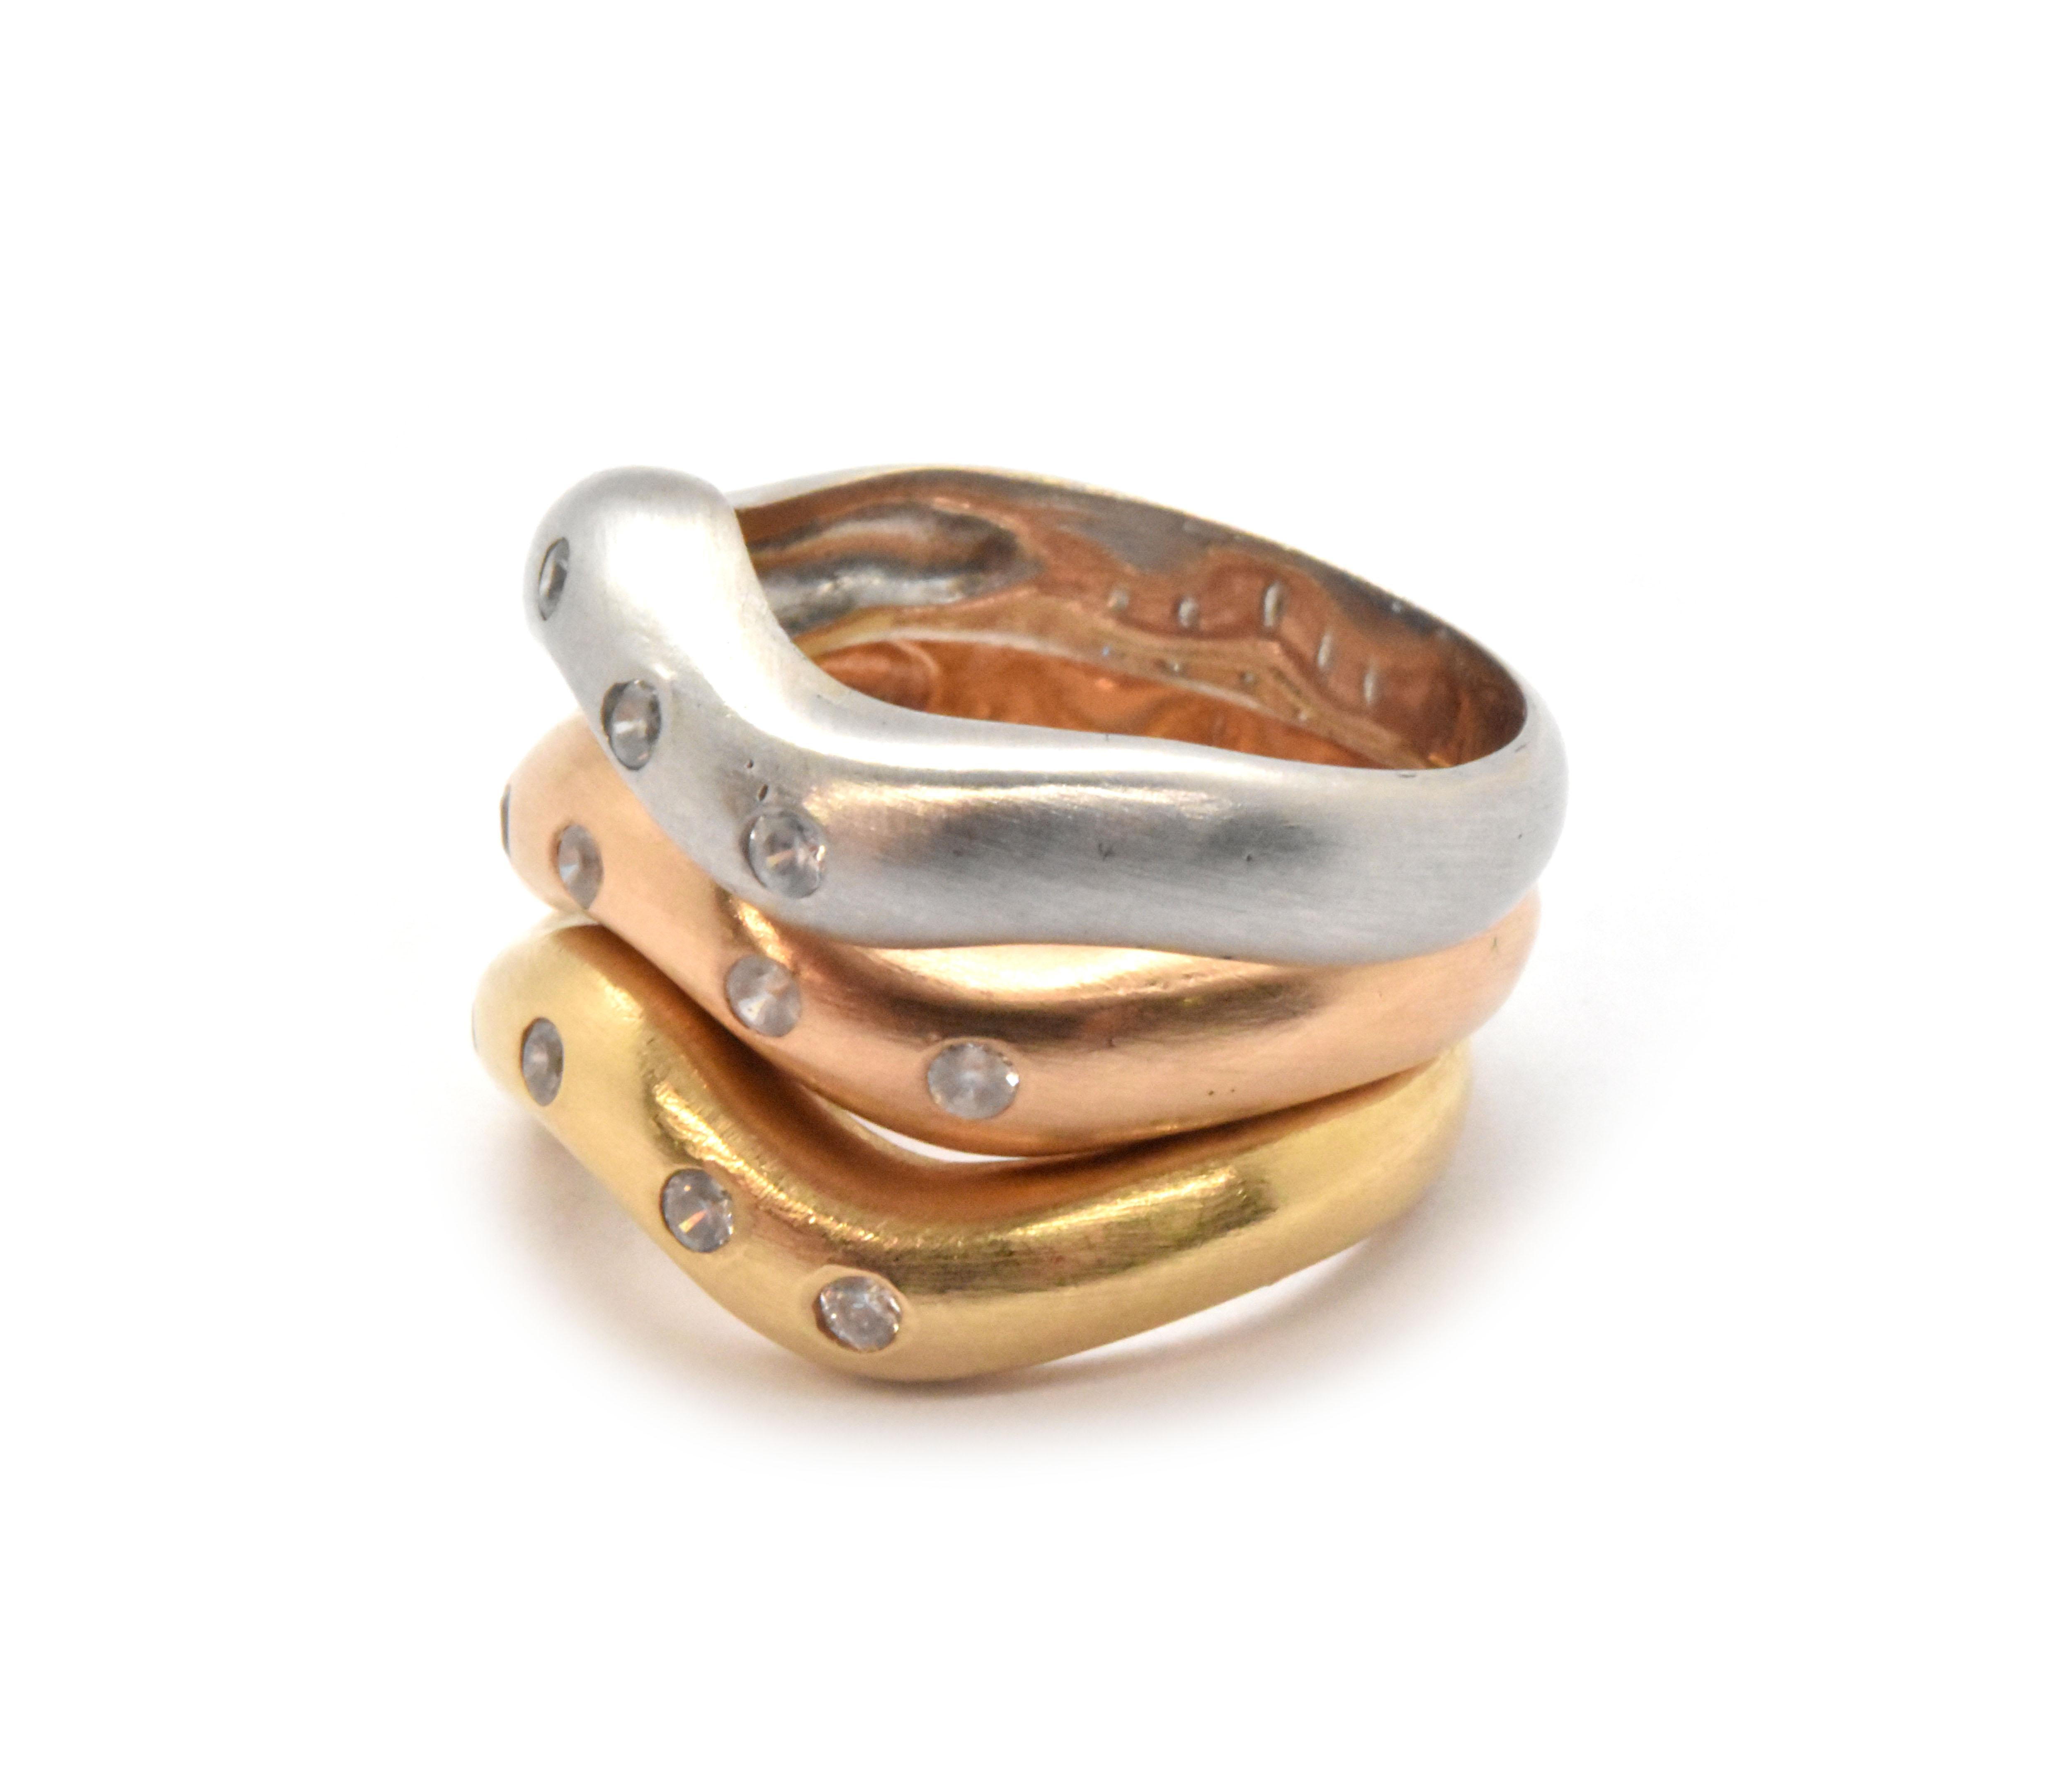 This set of rings is gorgeous! There are 3 rings in all, and each is made in 18k gold: white, rose and yellow. There are 5 diamonds in each band, and the stones have a total weight of 0.30ct. The bands measure 4mm wide, and together the bands weigh